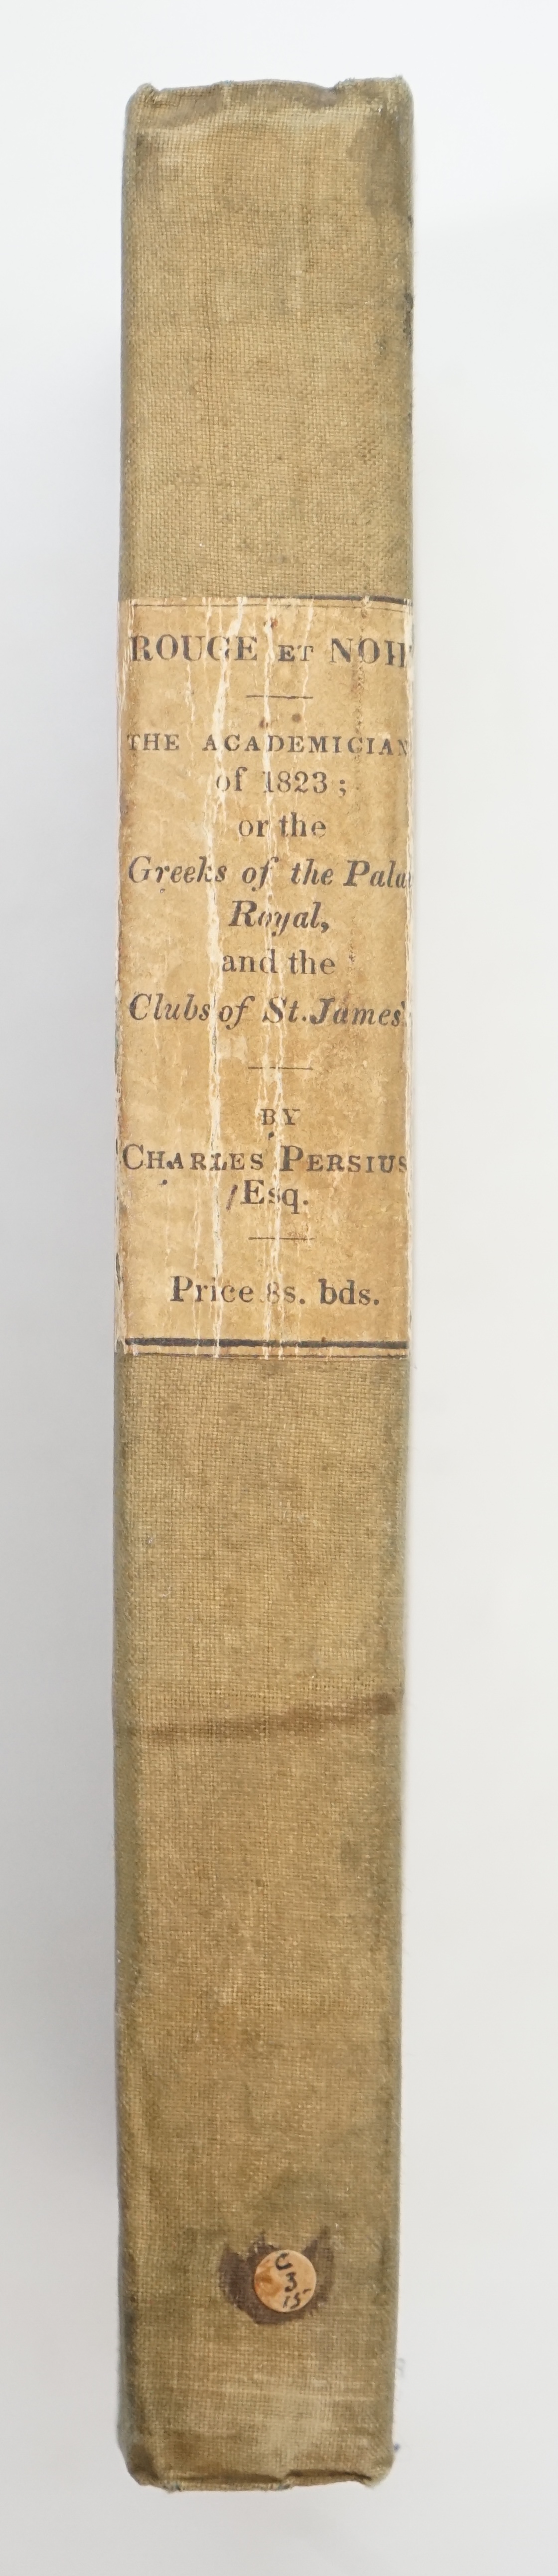 Persius, Charles [Dunne, Charles] - The Academicians of 1823; or, the Greeks of the Palais Royal, and the Clubs of St. James’s, 8vo, quarter cloth with drab boards, half title, hand-coloured engraved frontispiece of ‘’La